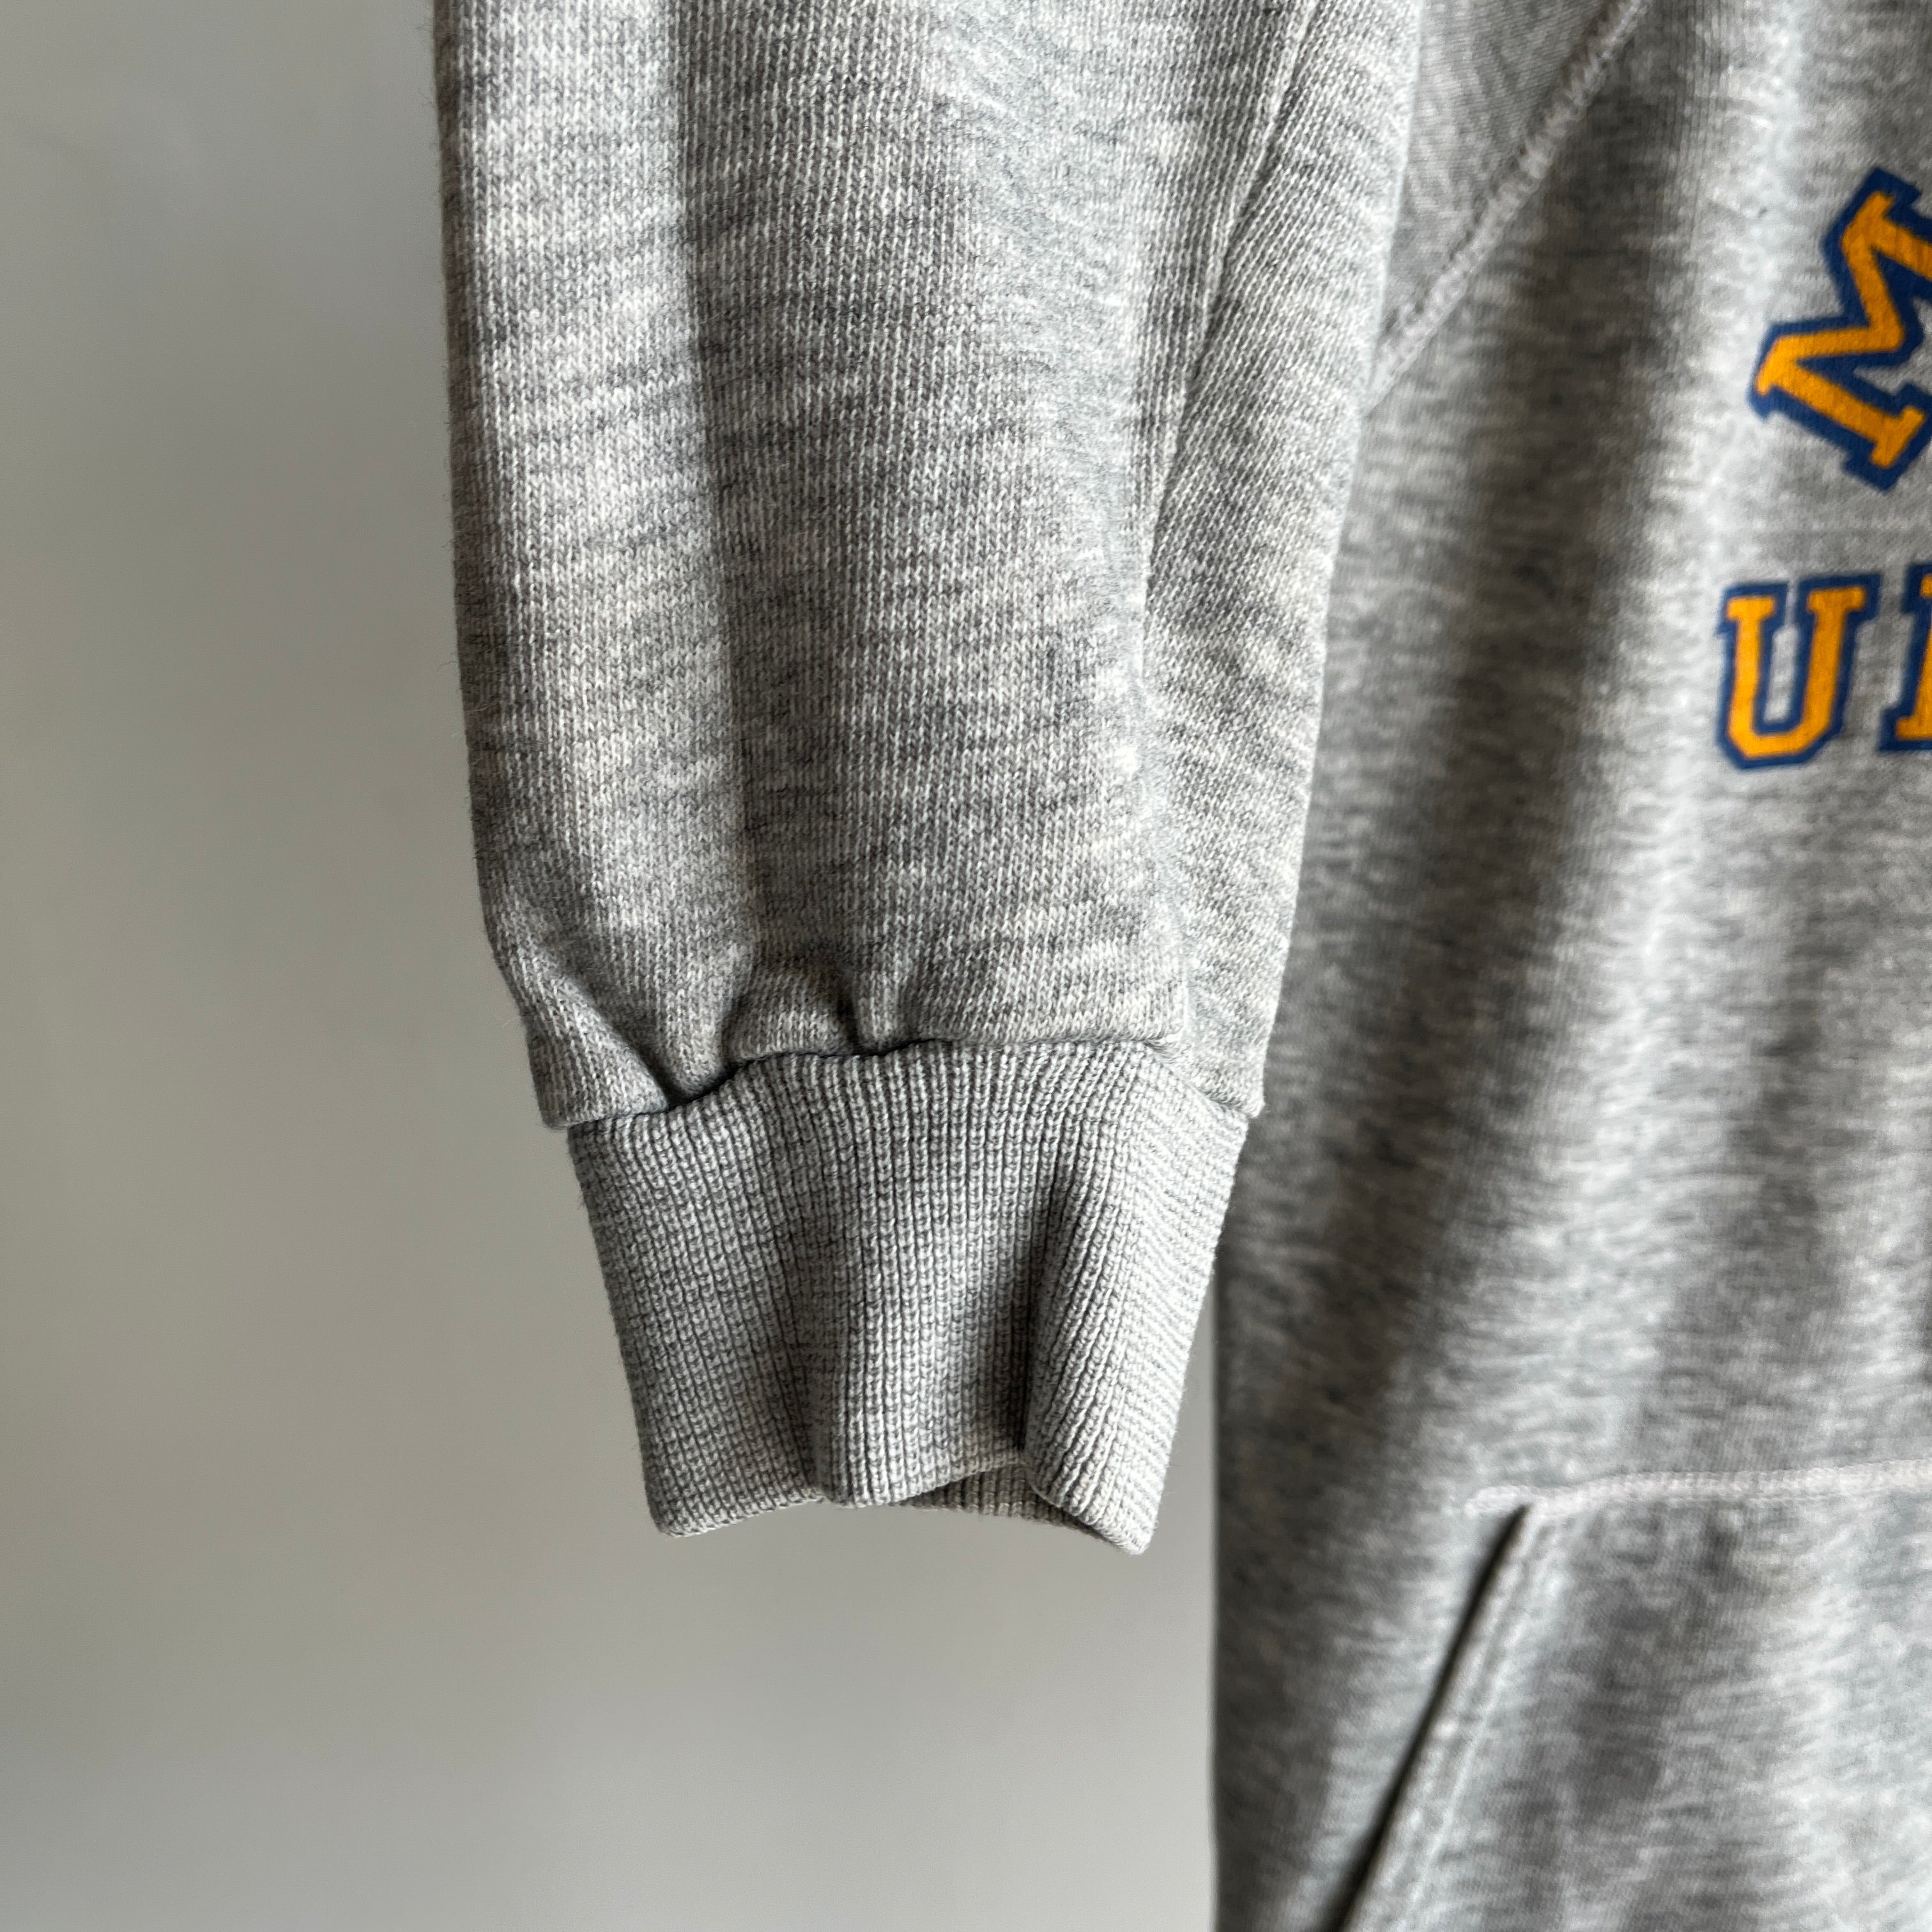 1970/80s Marquette University Super Thin and Thrashed Pull Over Hoodie